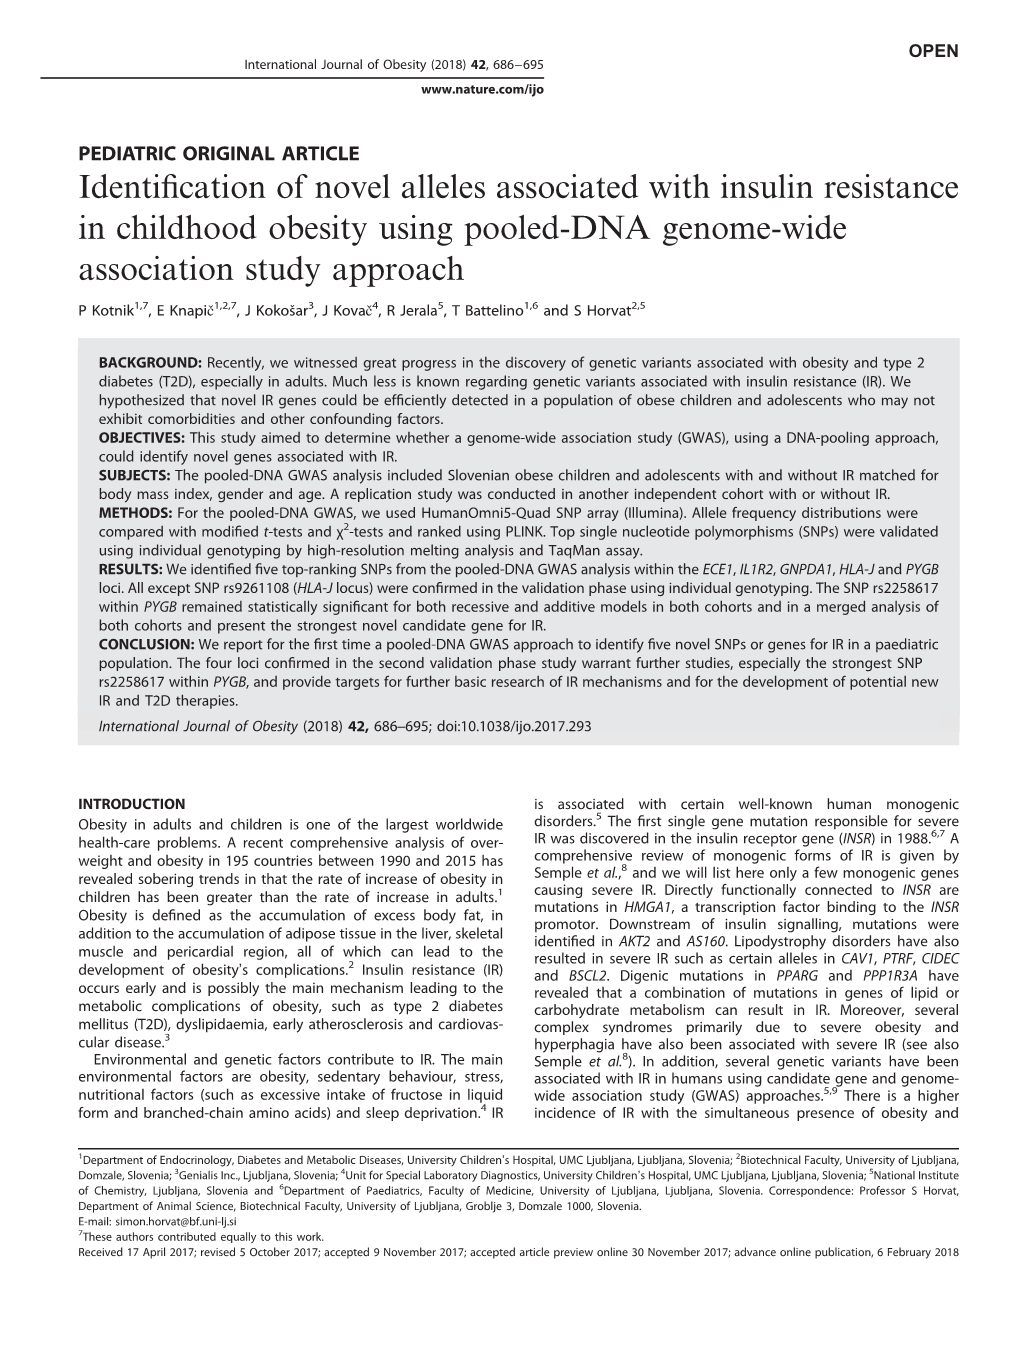 Identification of Novel Alleles Associated with Insulin Resistance In